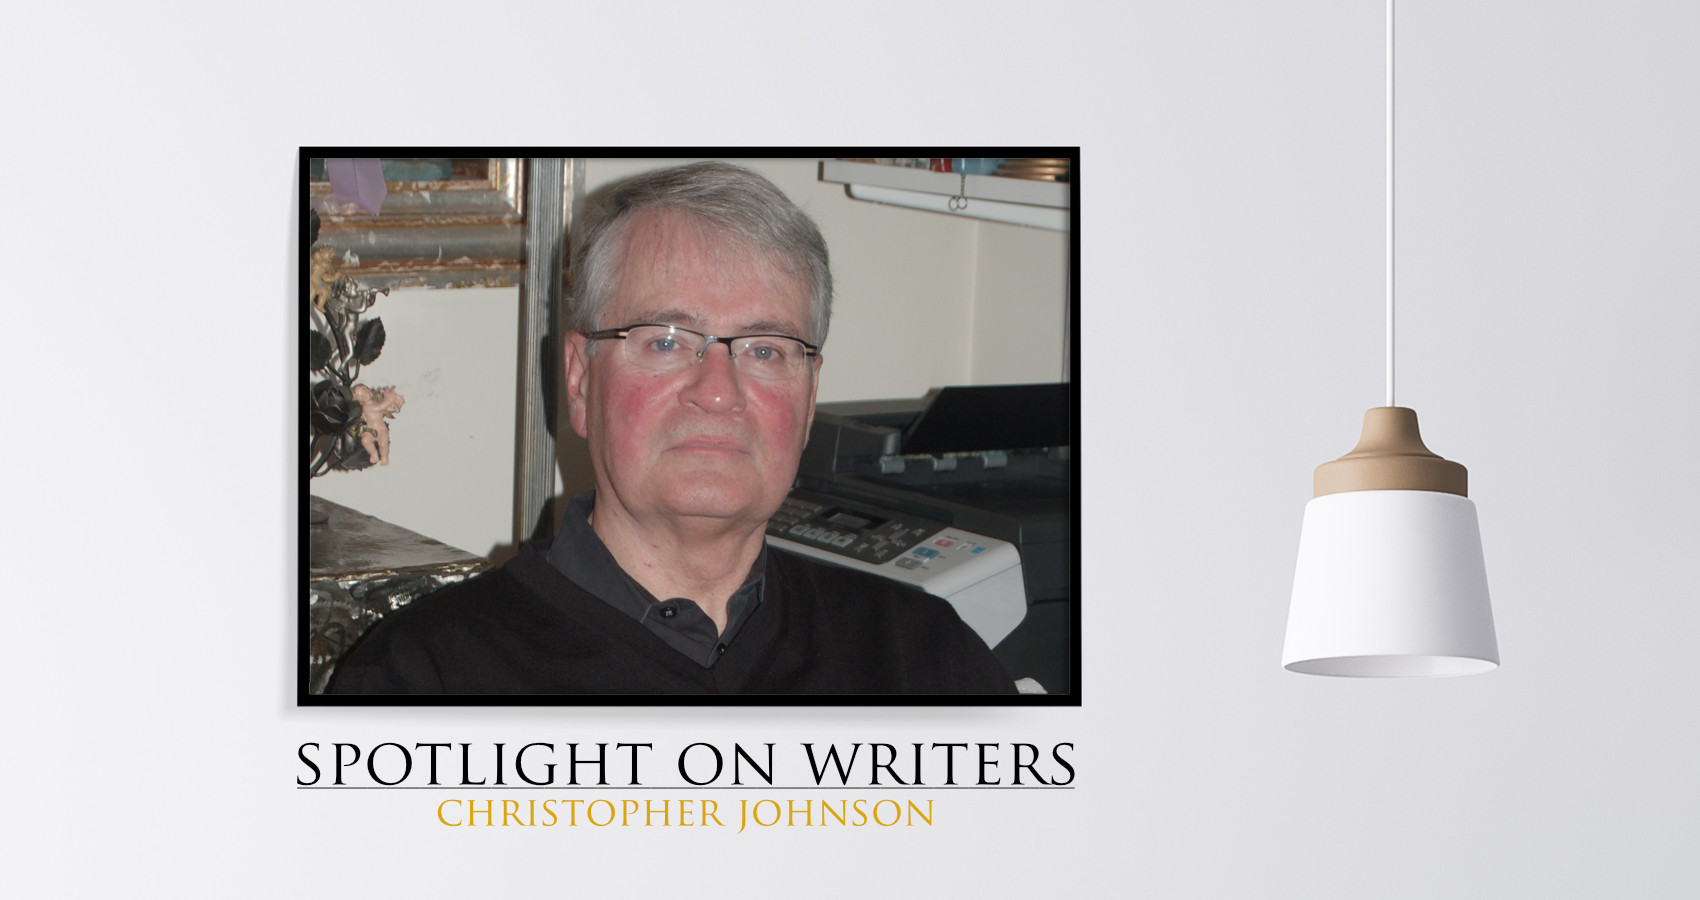 Spotlight On Writers - Christopher Johnson, an interview at Spillwords.com